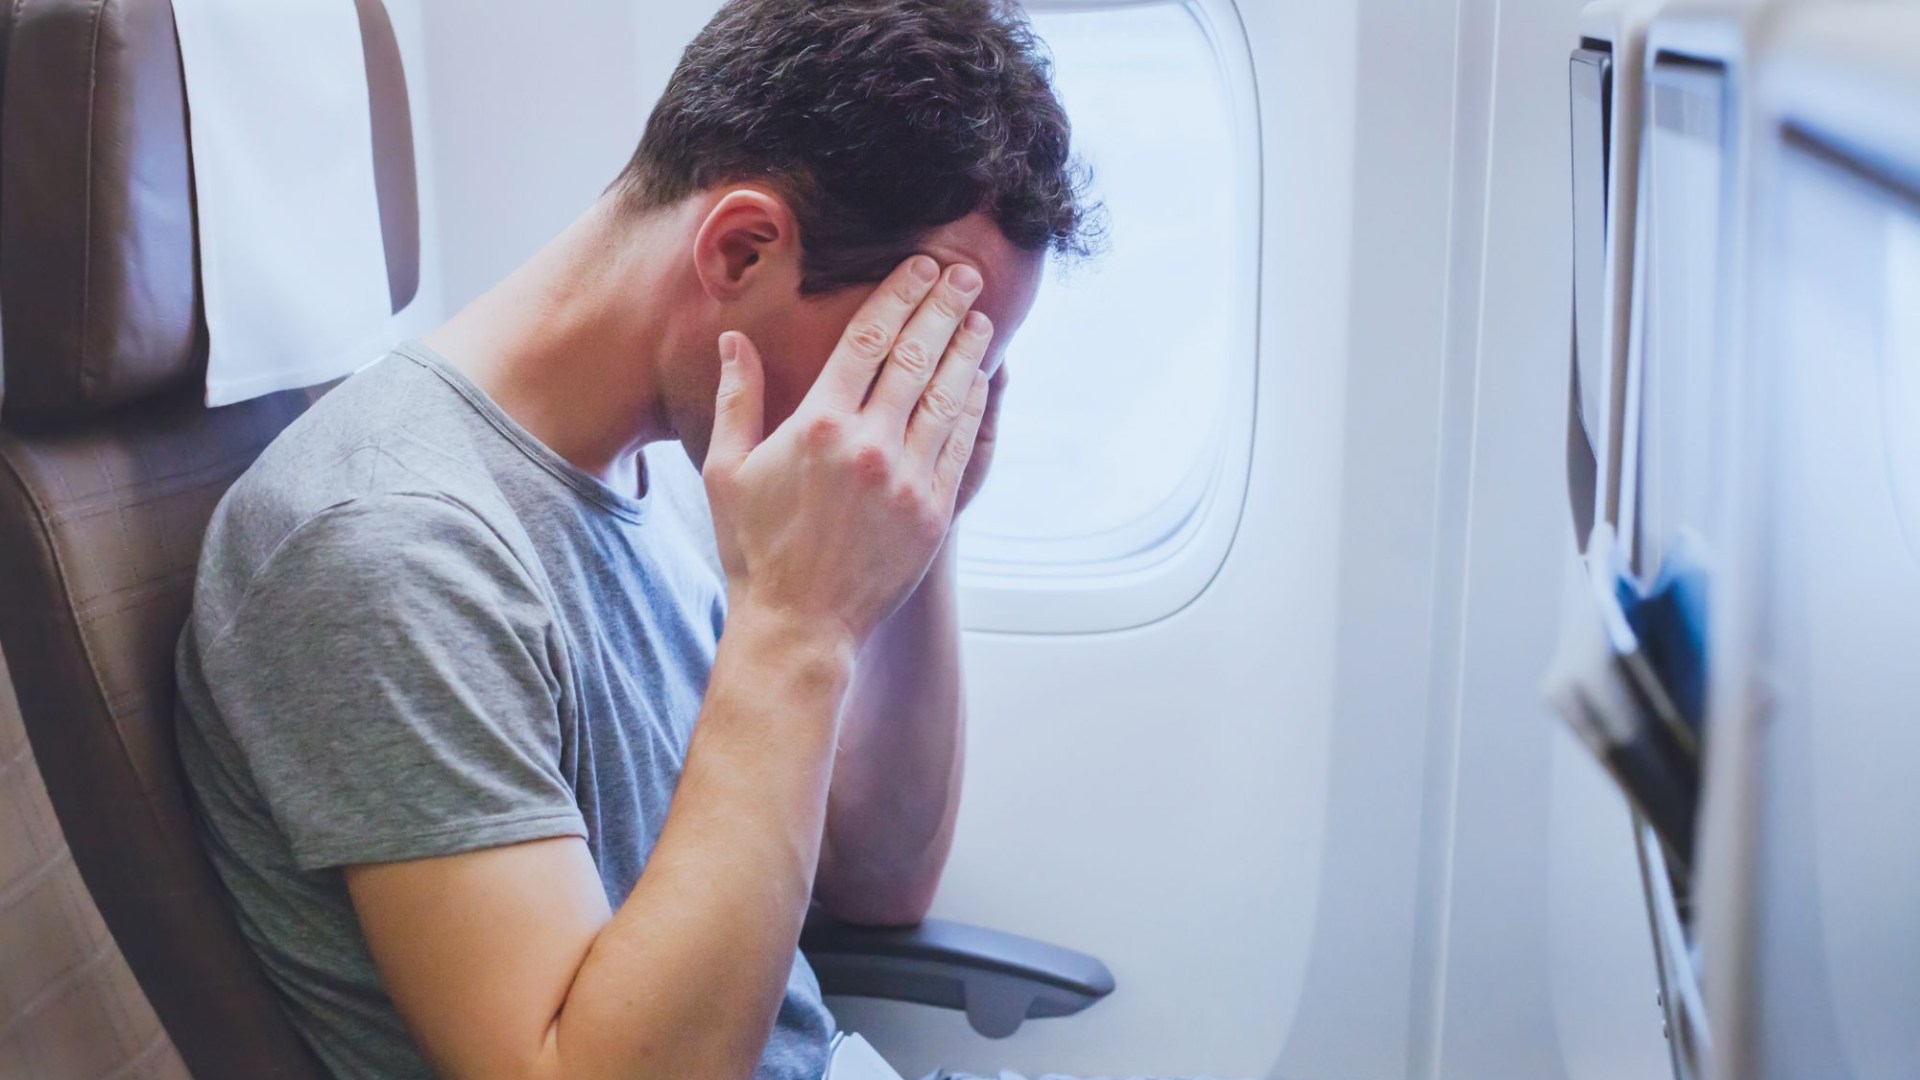 Top Anxiety Relief: The #1 Pre-Flight Request for Nervous Flyers